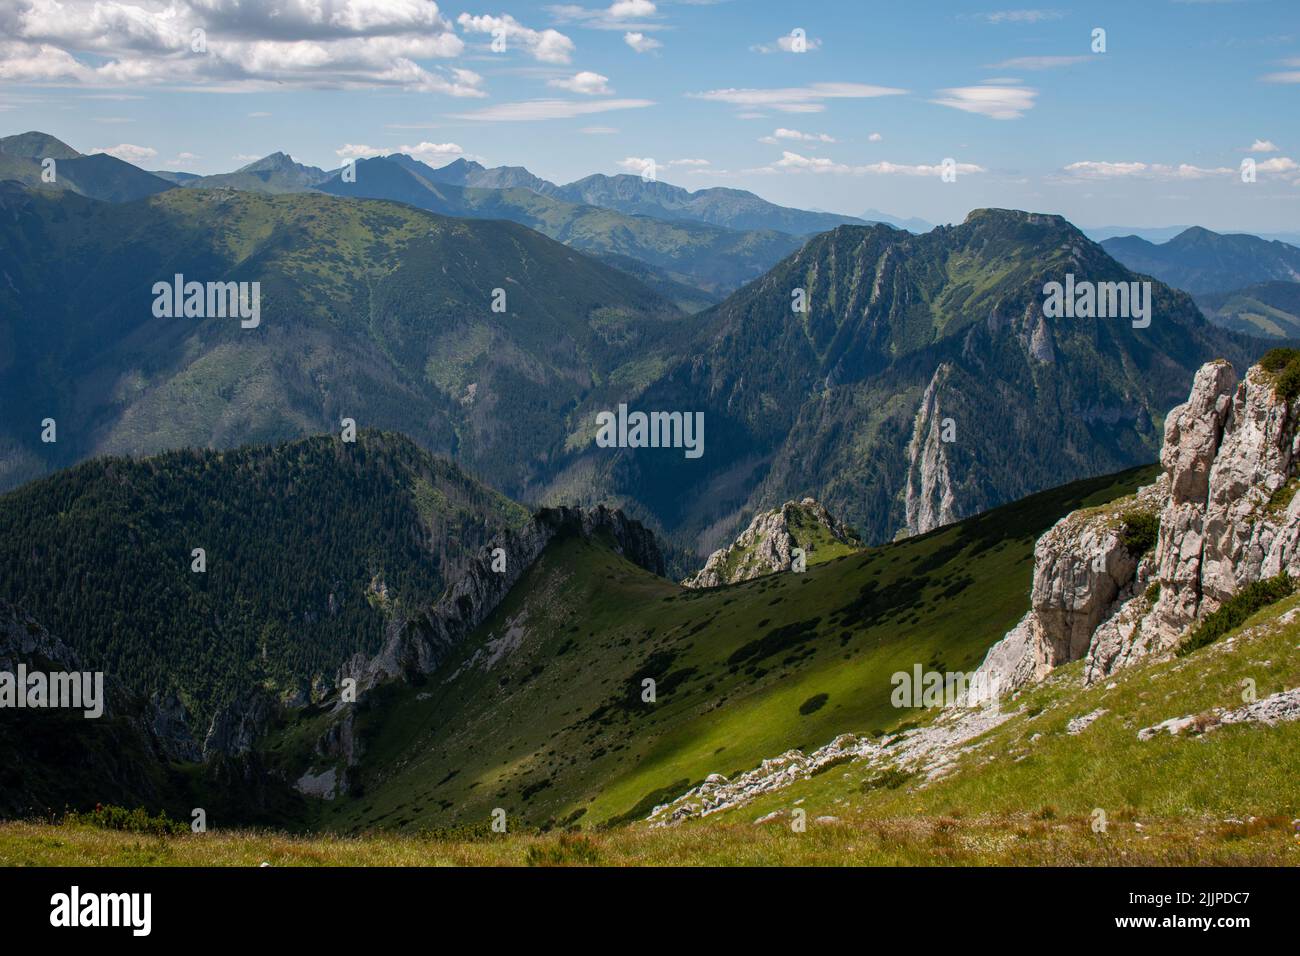 The view from a hiking trail towards Schronisko na Hali Ornak in Tatry mountains, Poland Stock Photo